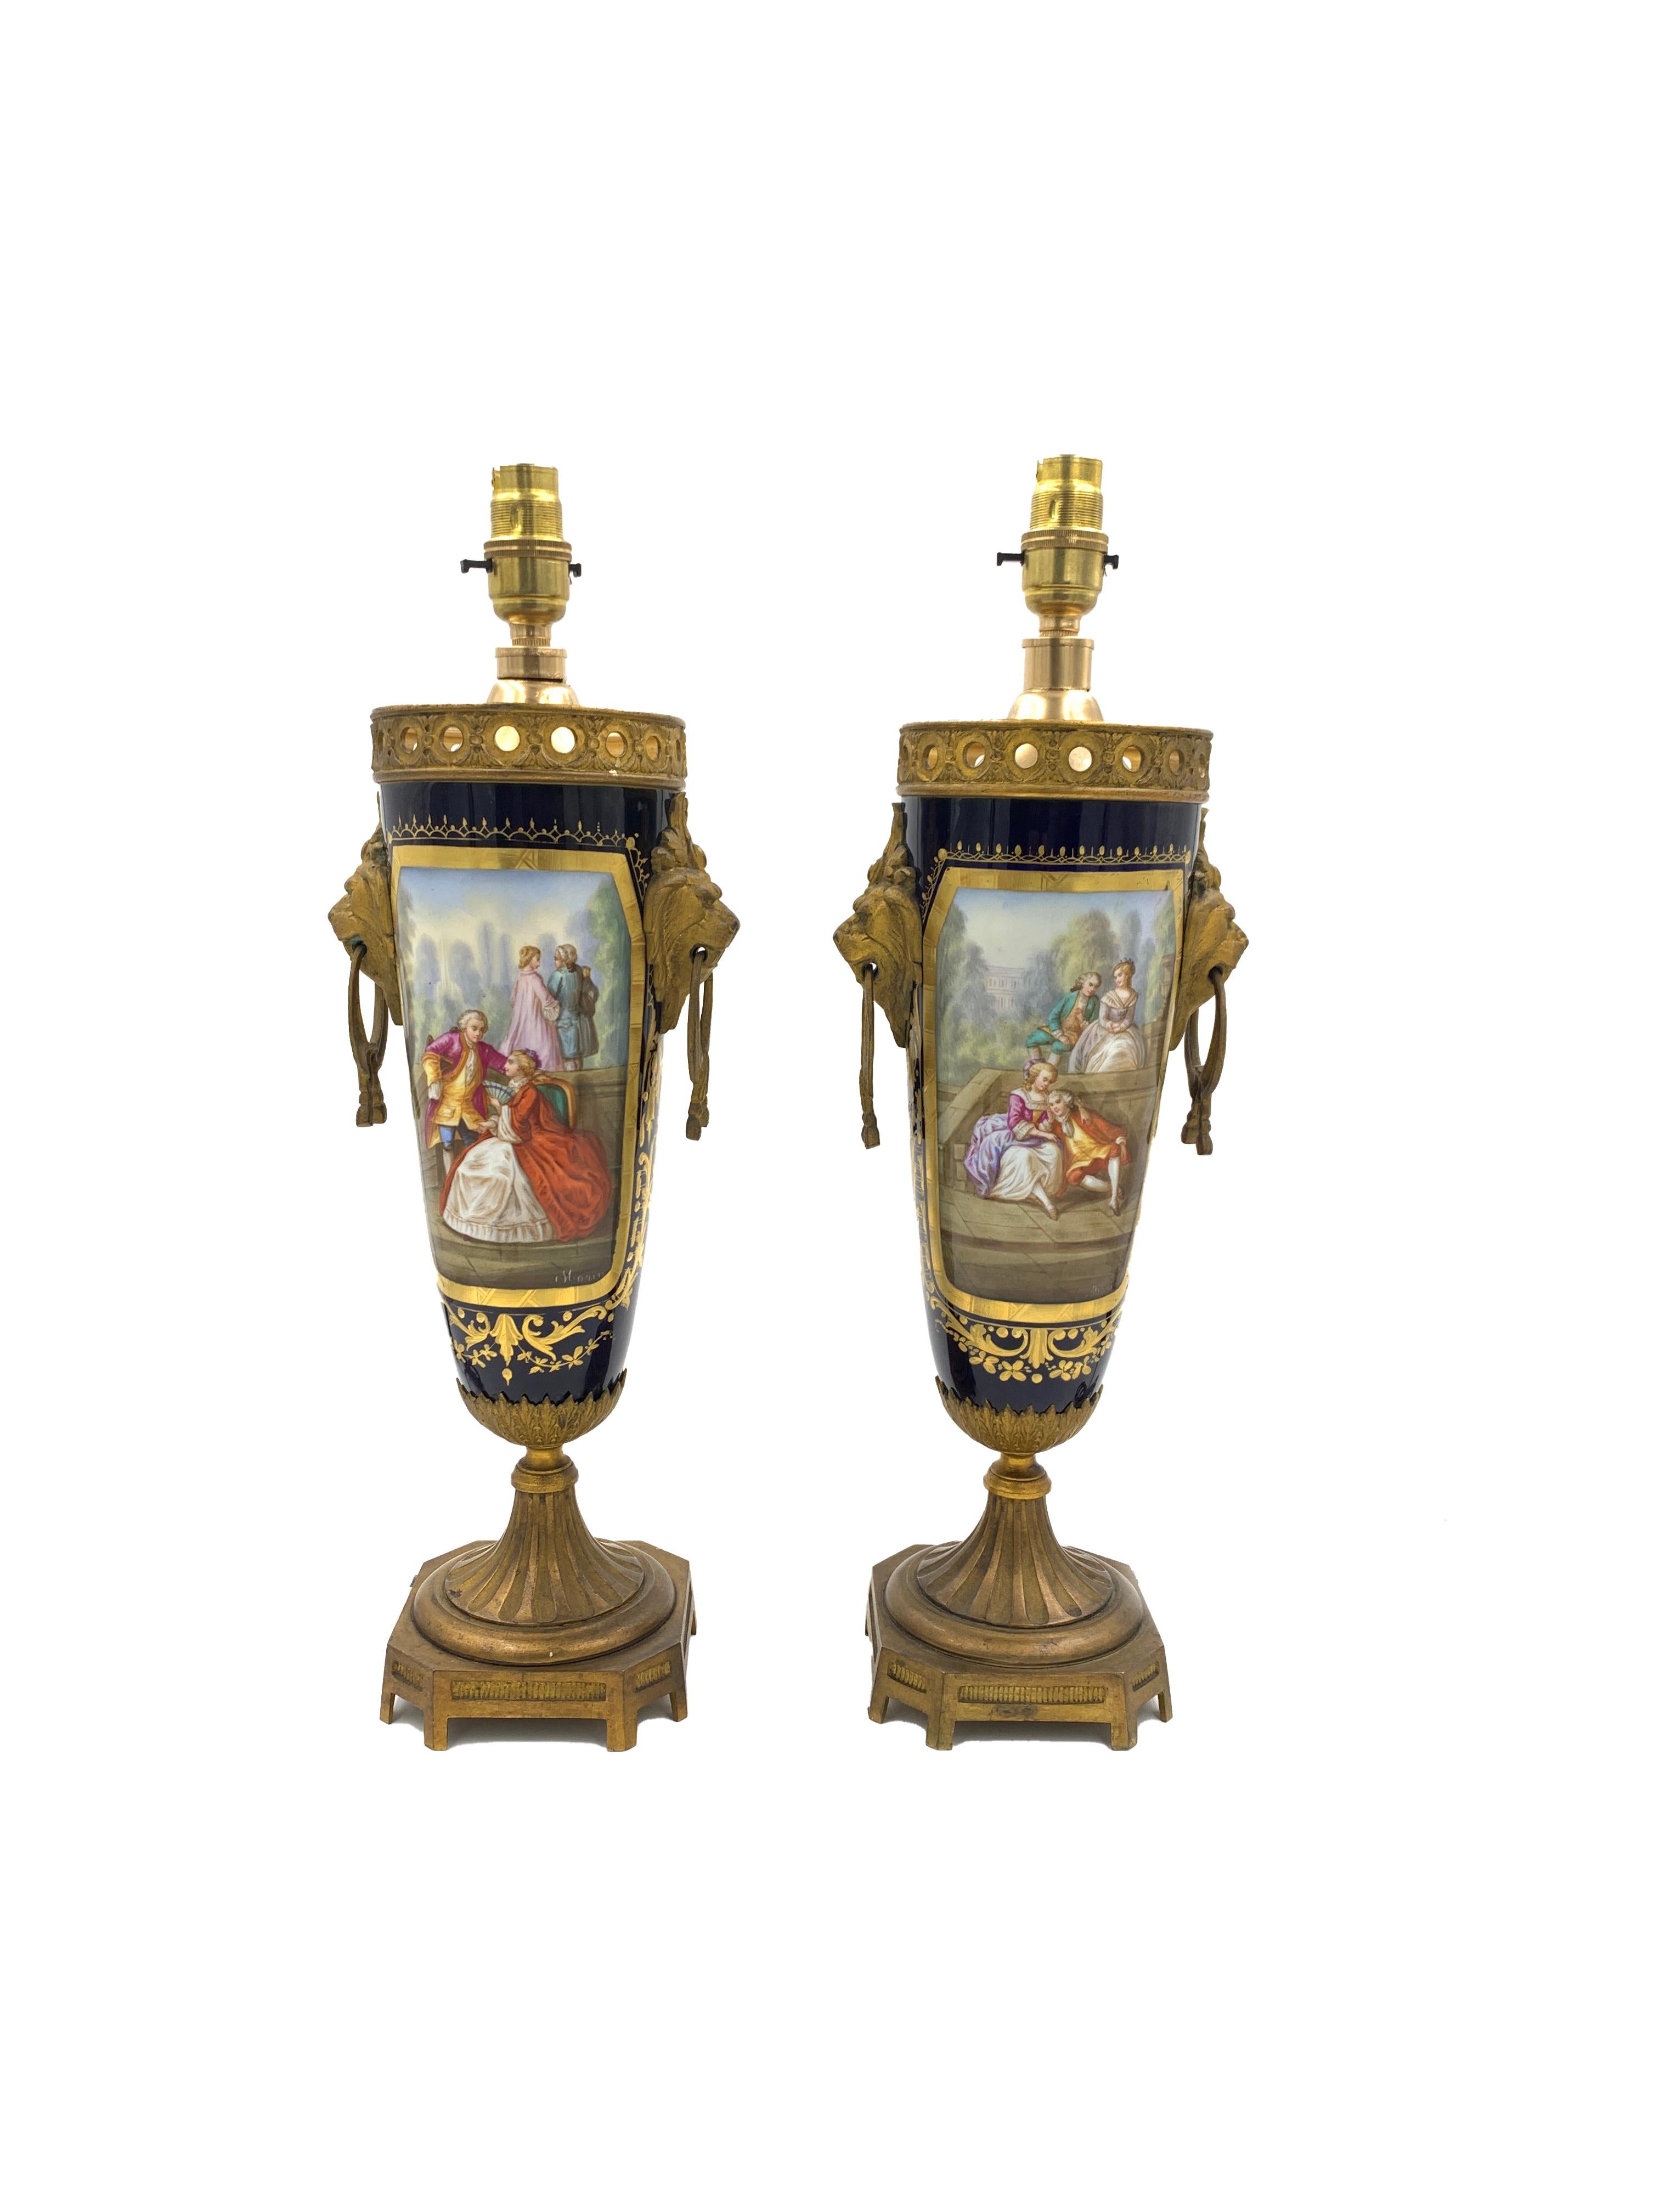 A wonderful pair of French 19th century blue Sèvres style porcelain and ormolu table lamps. Each elegant lamp is raised by a square ormolu base, hand painted in different scenes and signed by the artist.